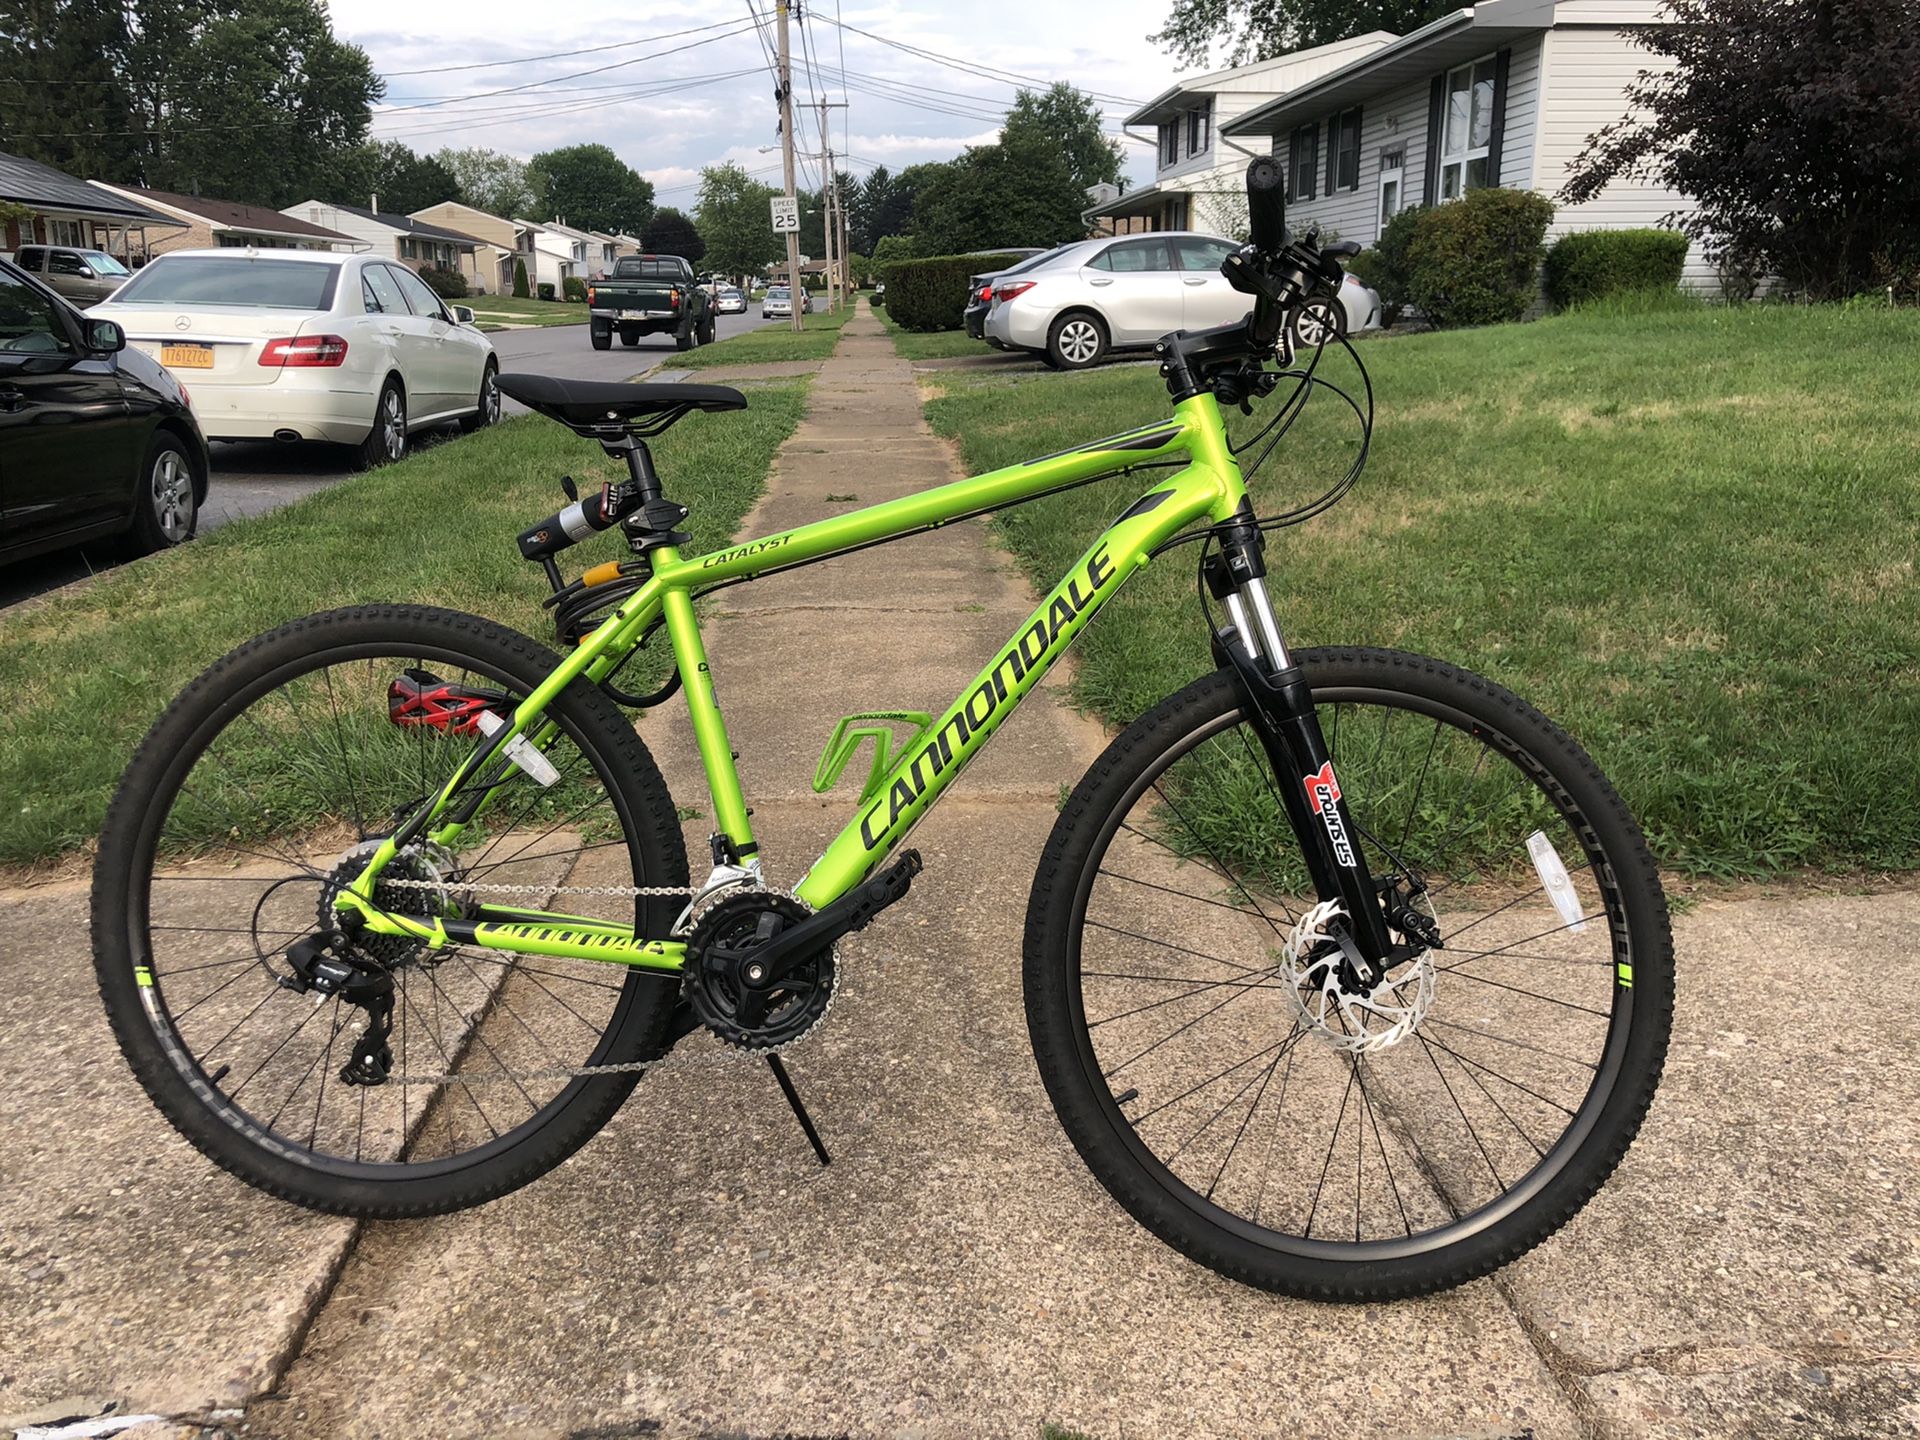 Cannondale Catalyst 4